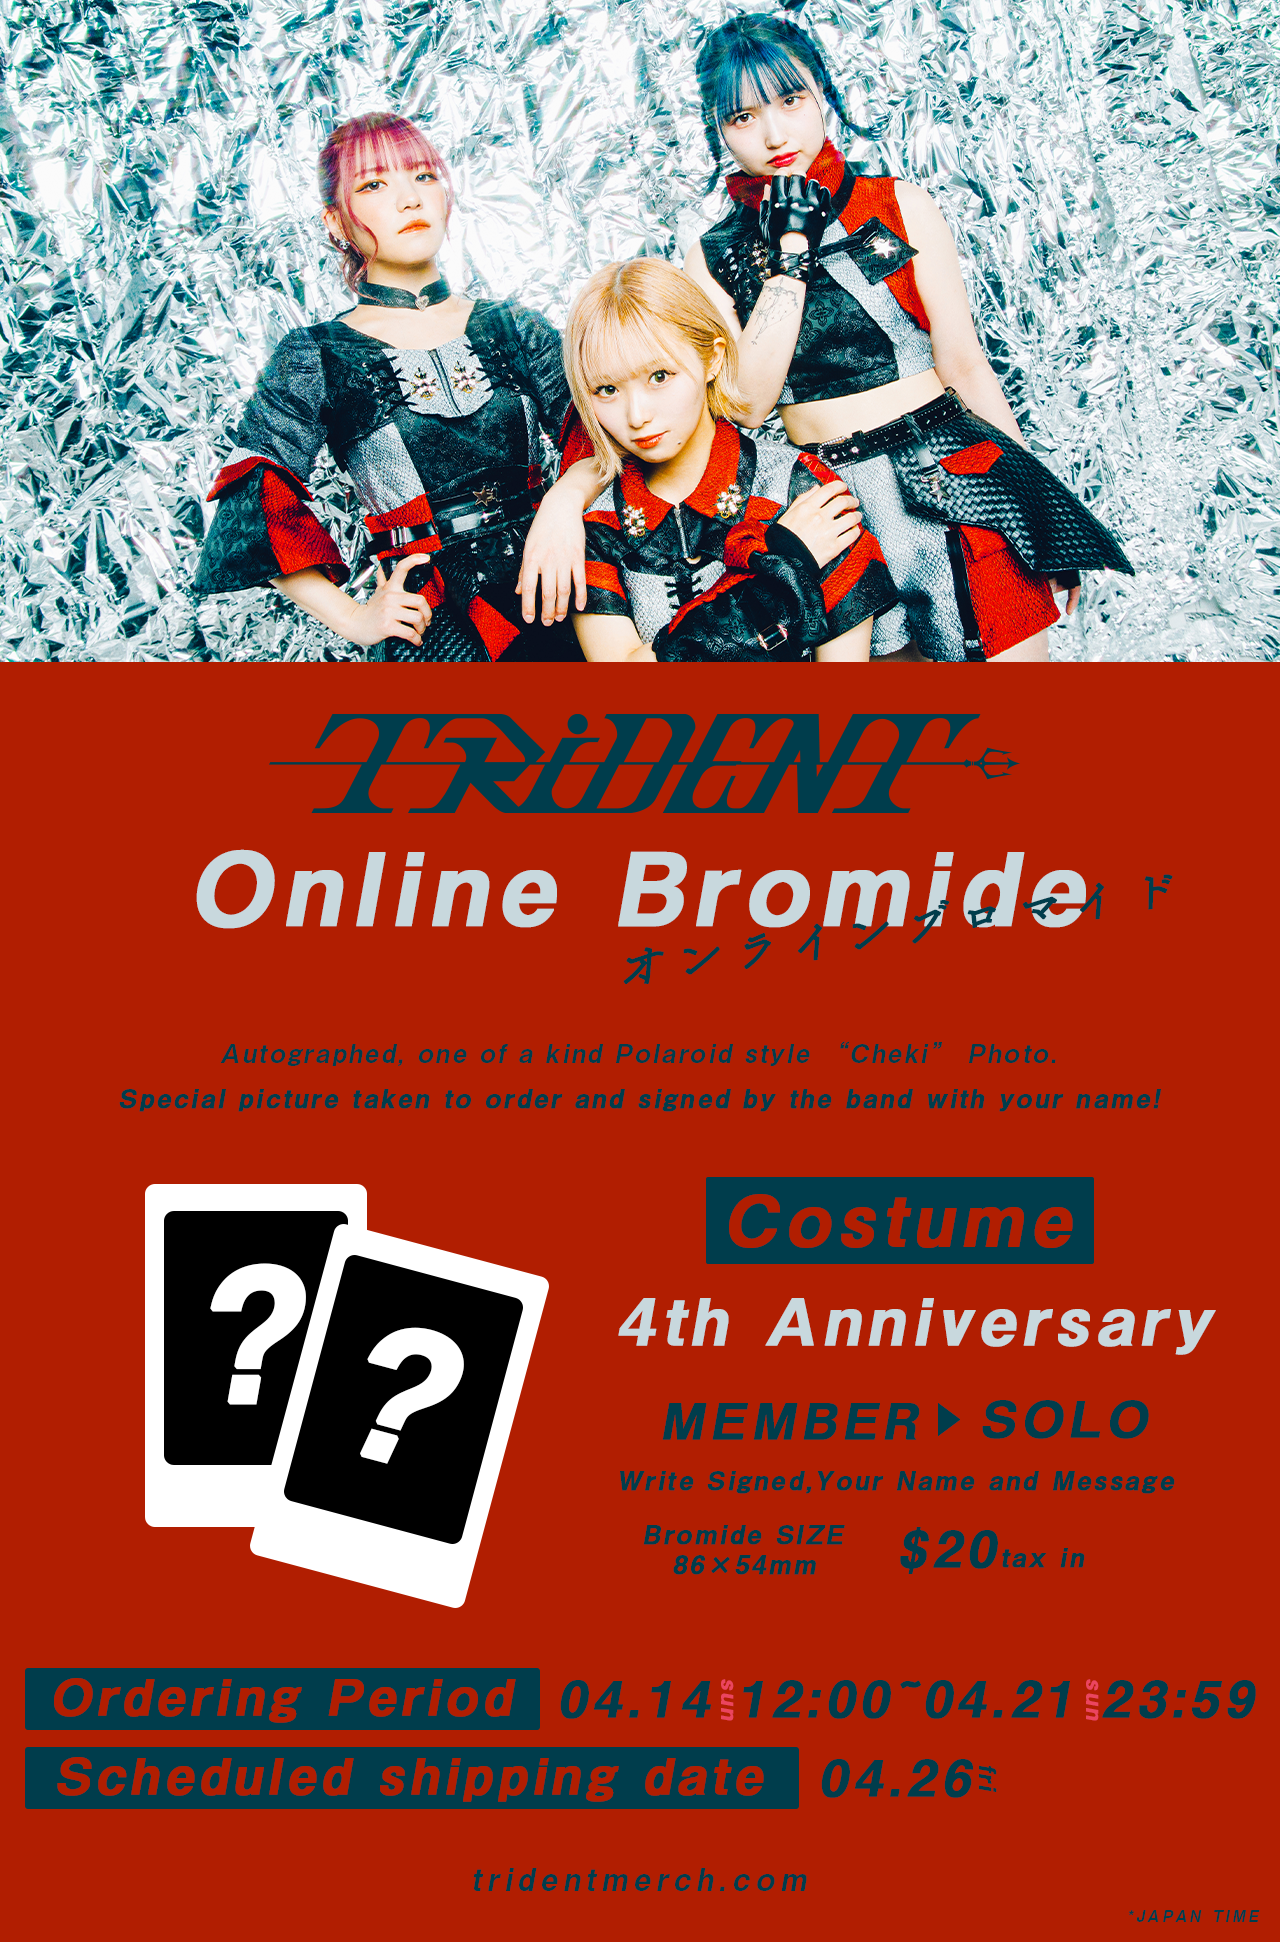 TRiDENT "ONLINE BROMIDE" Autographed Polaroid Style Photo (With Your Custom Name) - Individual Member